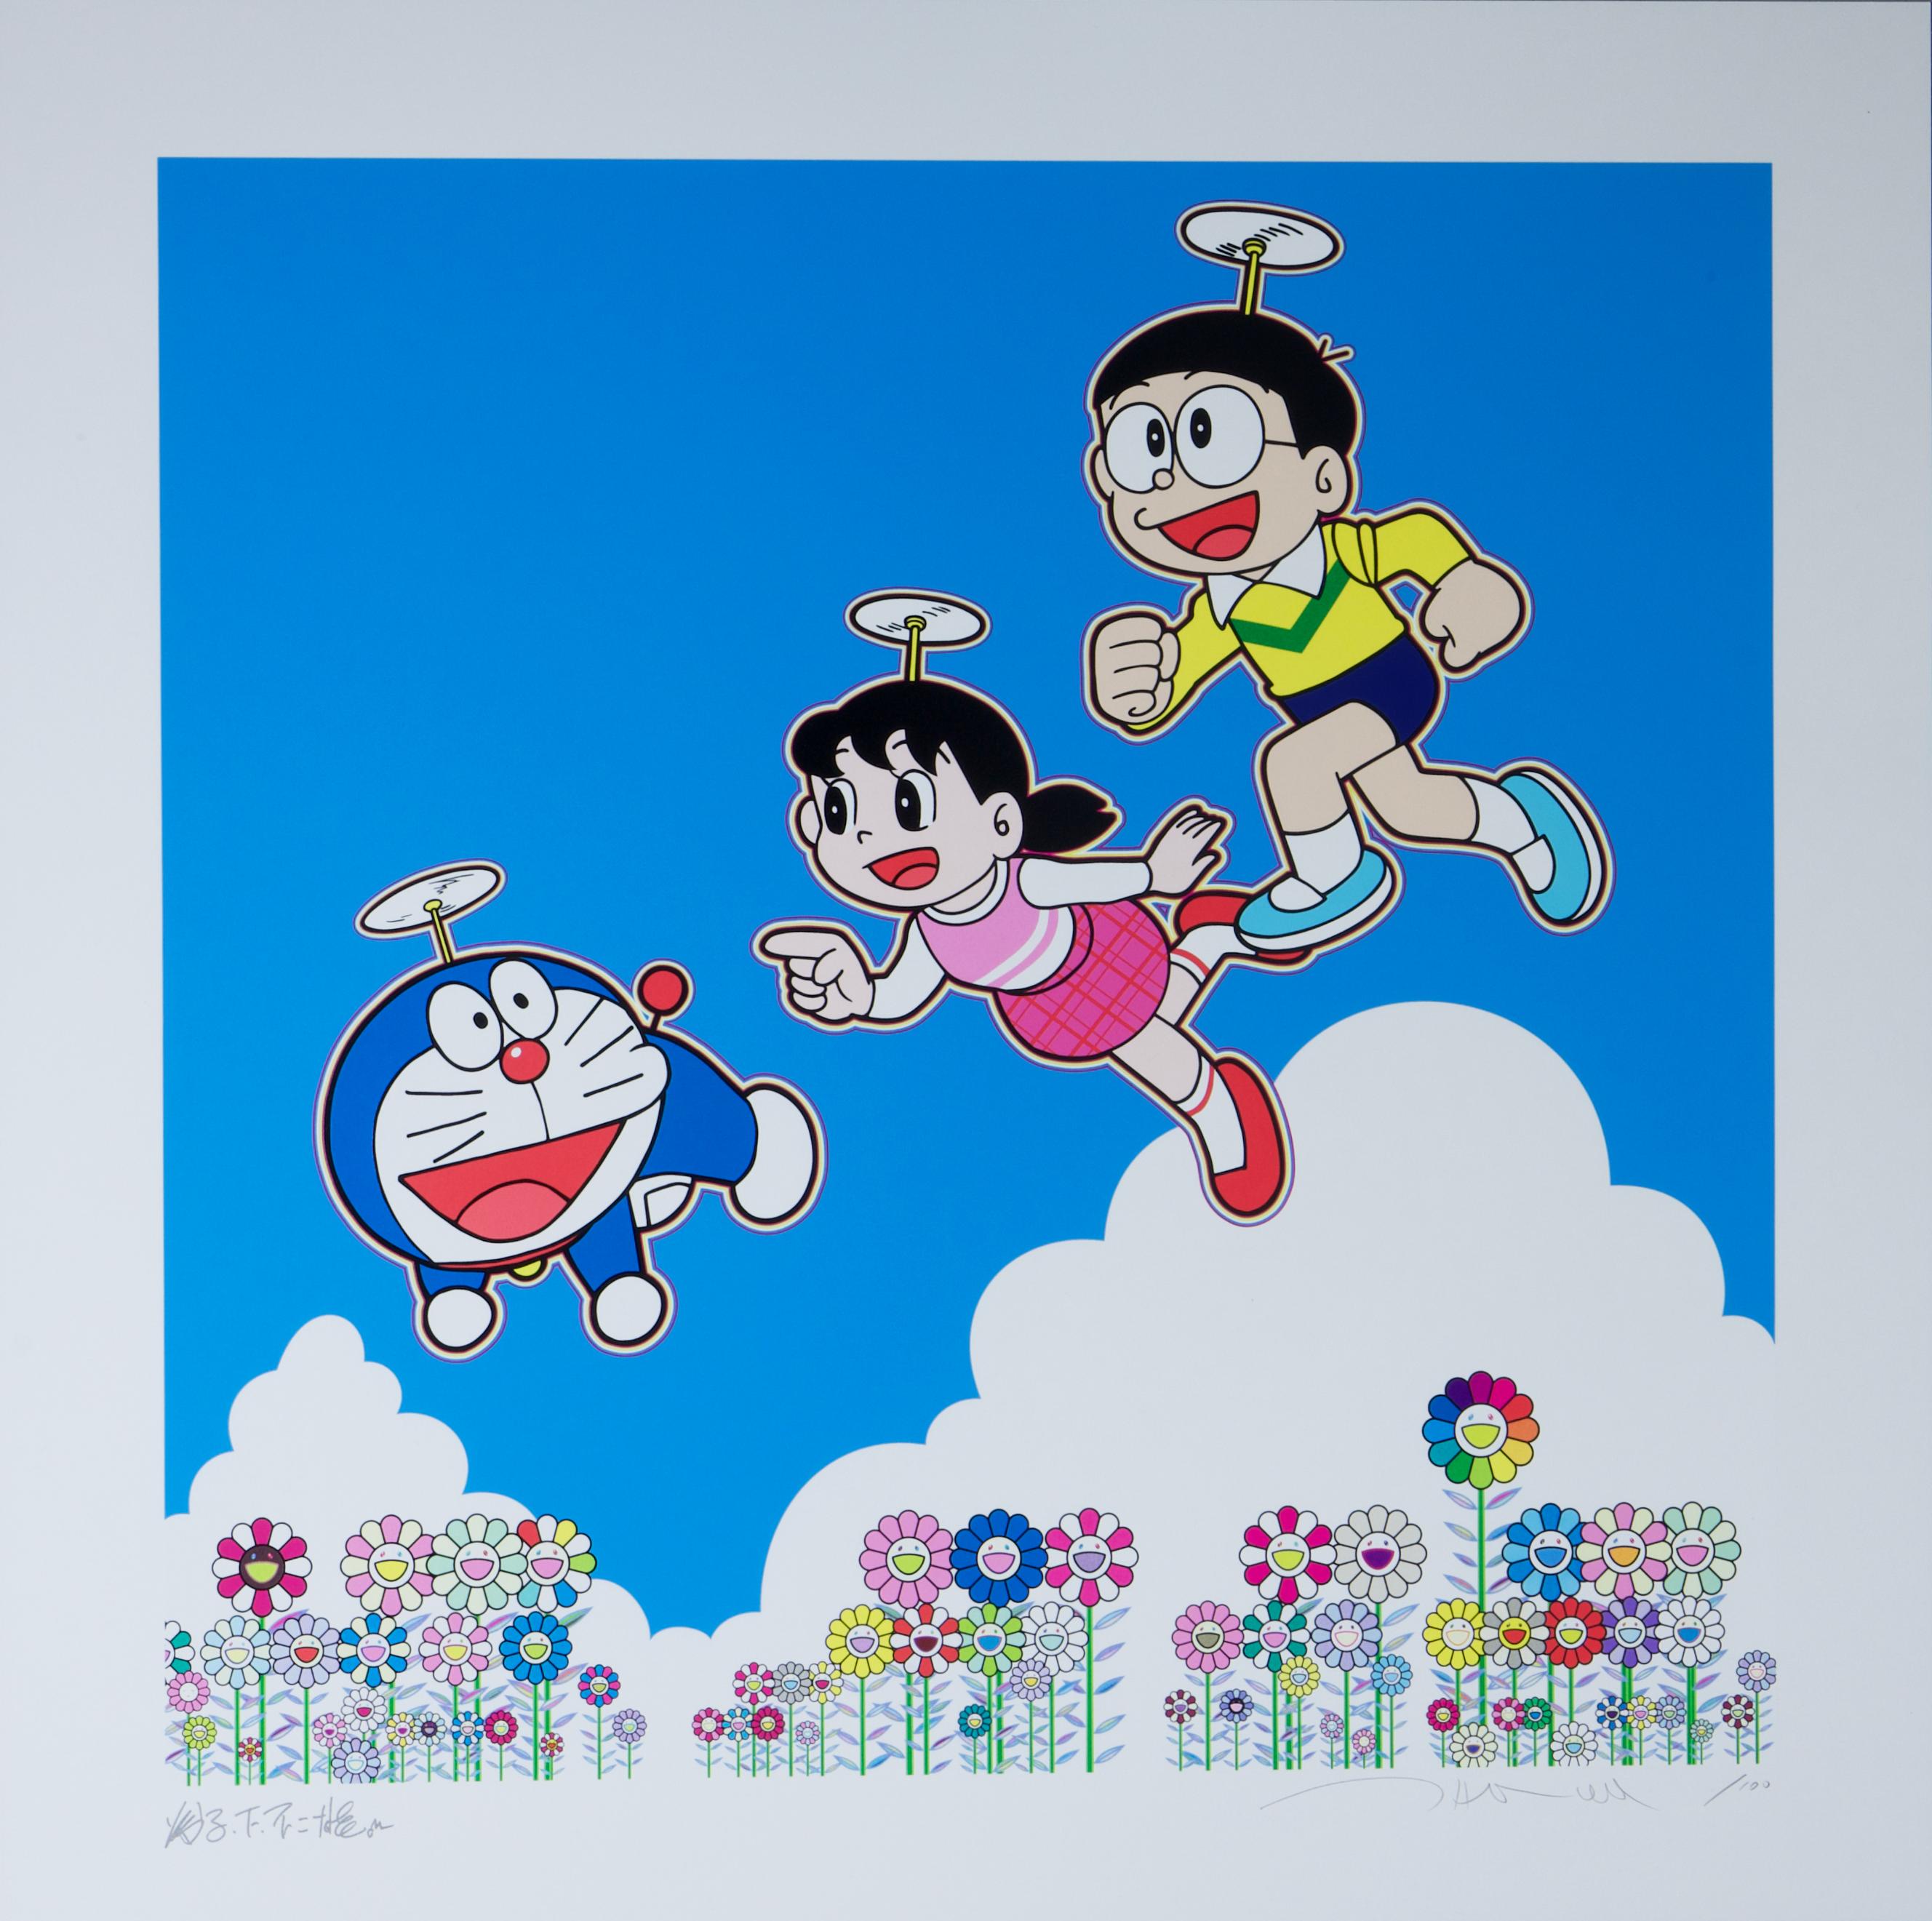 Blue Sky! Like We Could Go On Forever! - Print by Takashi Murakami